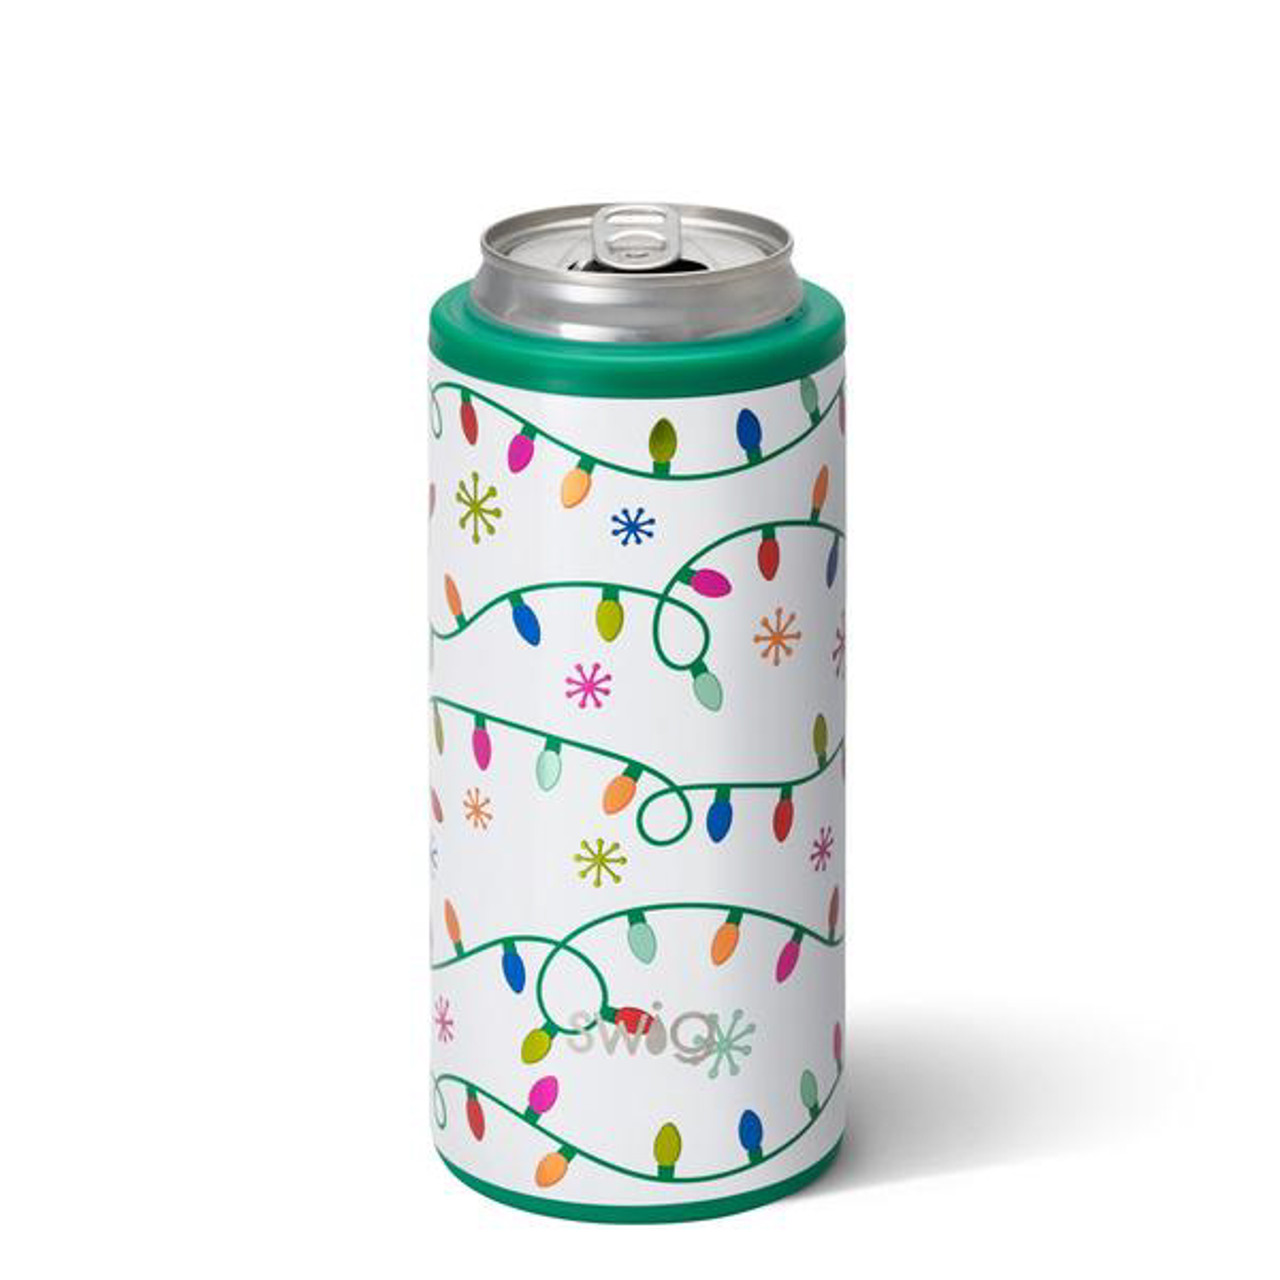 https://cdn11.bigcommerce.com/s-6zwhmb4rdr/images/stencil/1280x1280/products/72057/192632/the-lamp-stand-swig-let-it-glow-12-oz-skinny-can-cooler-s102-isc-lg-1__08363.1636726109.jpg?c=1